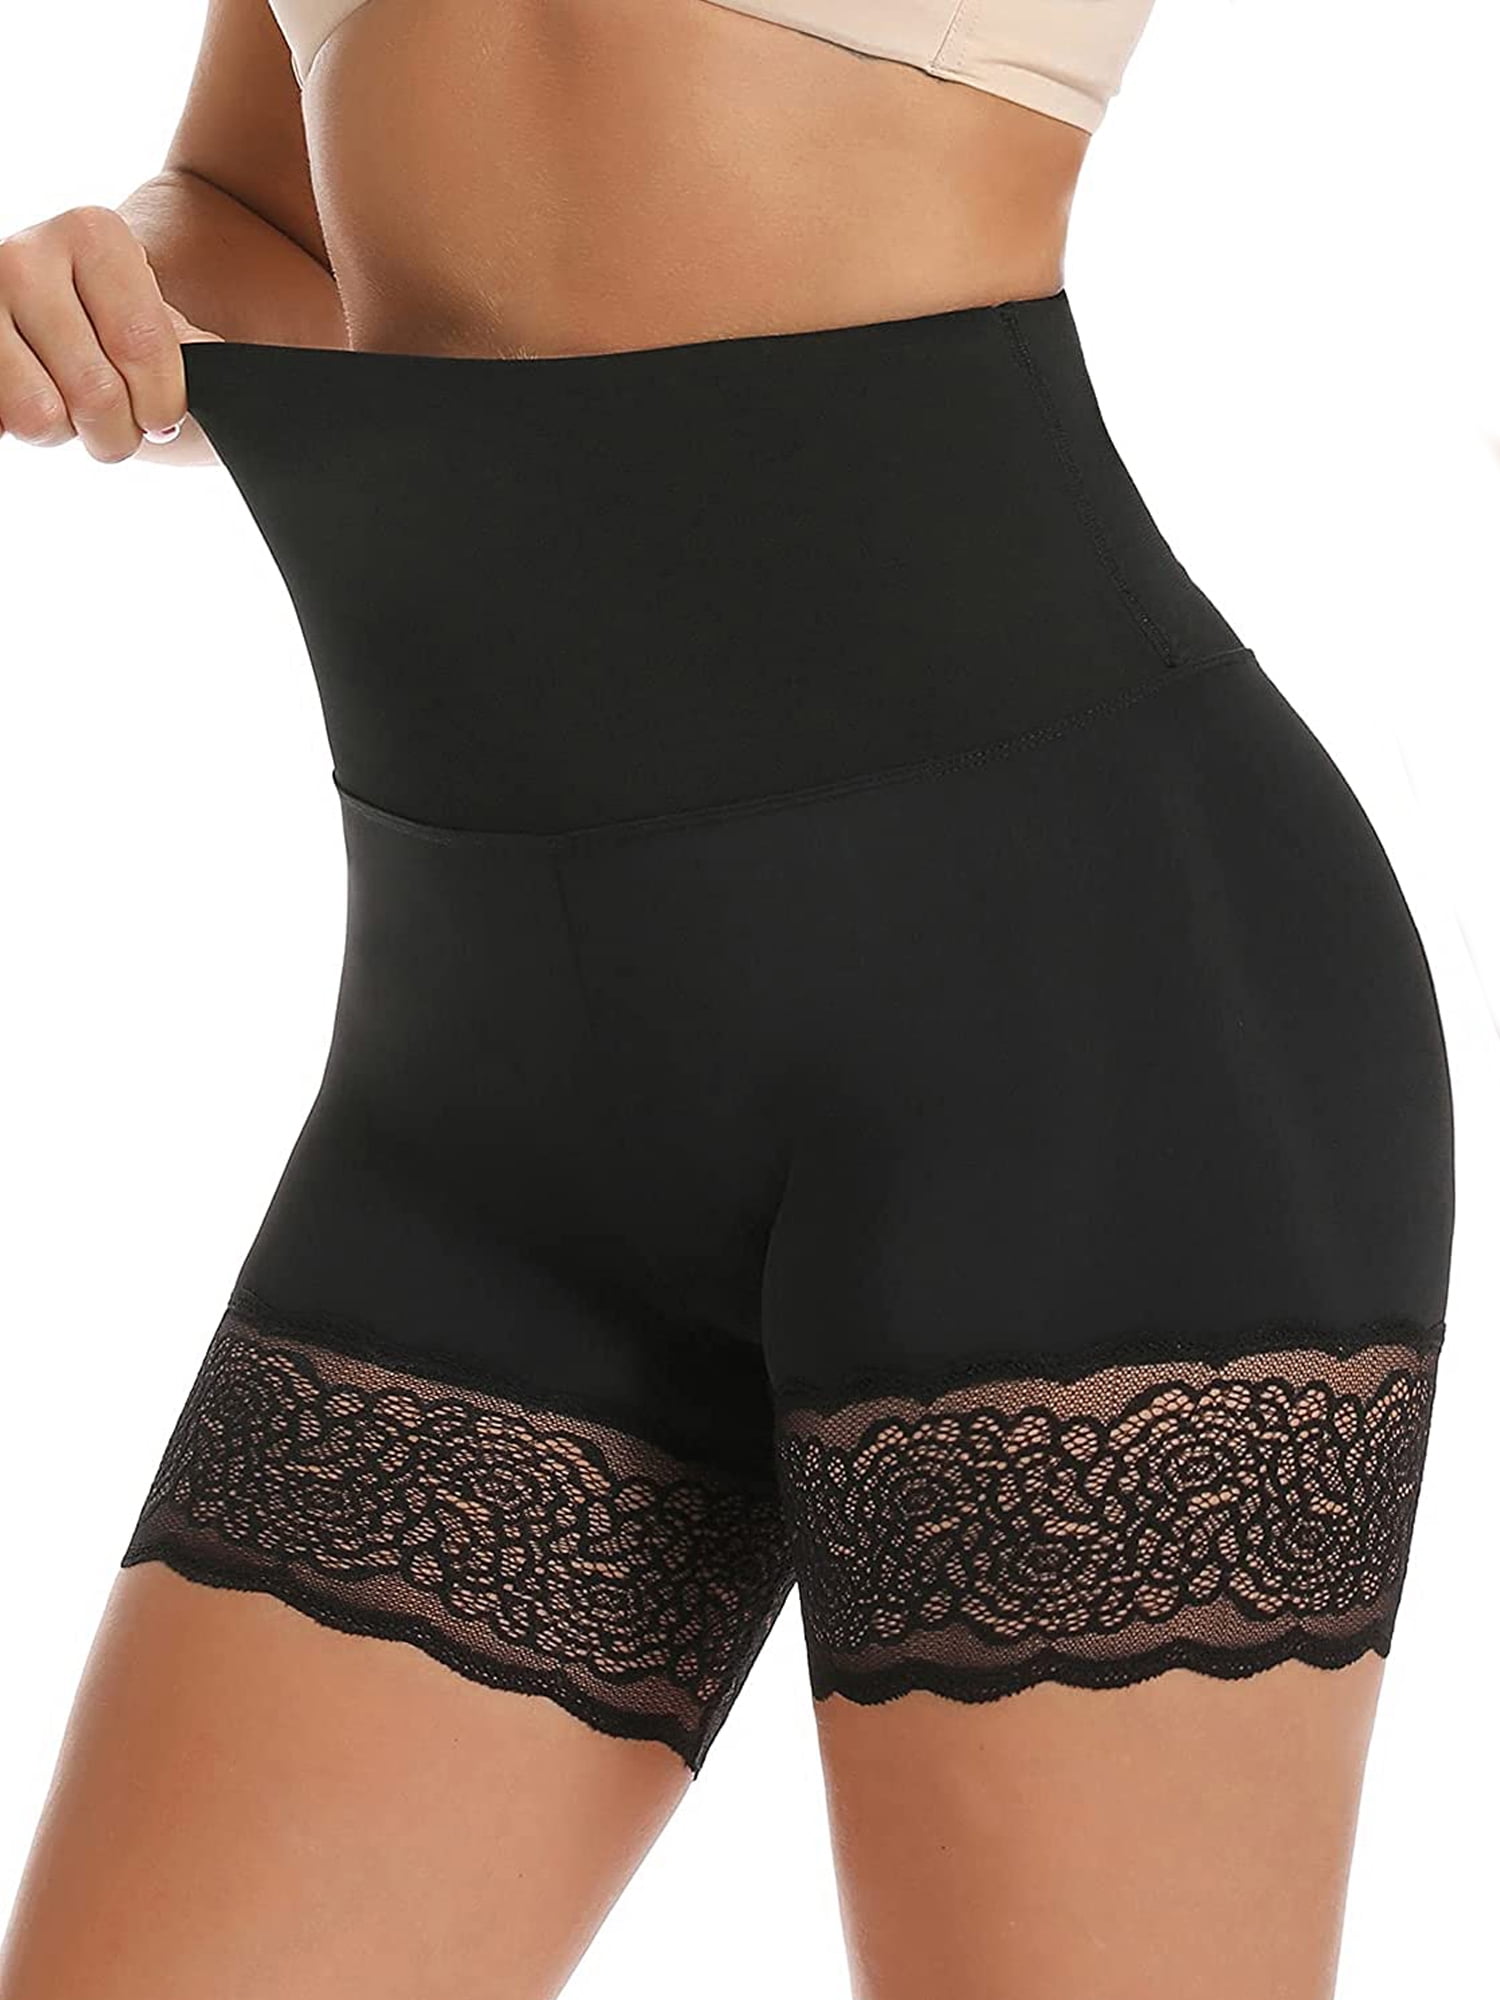 Finlin Women's High Waisted Tummy Control Lace Body Shaper Thigh Slimmer